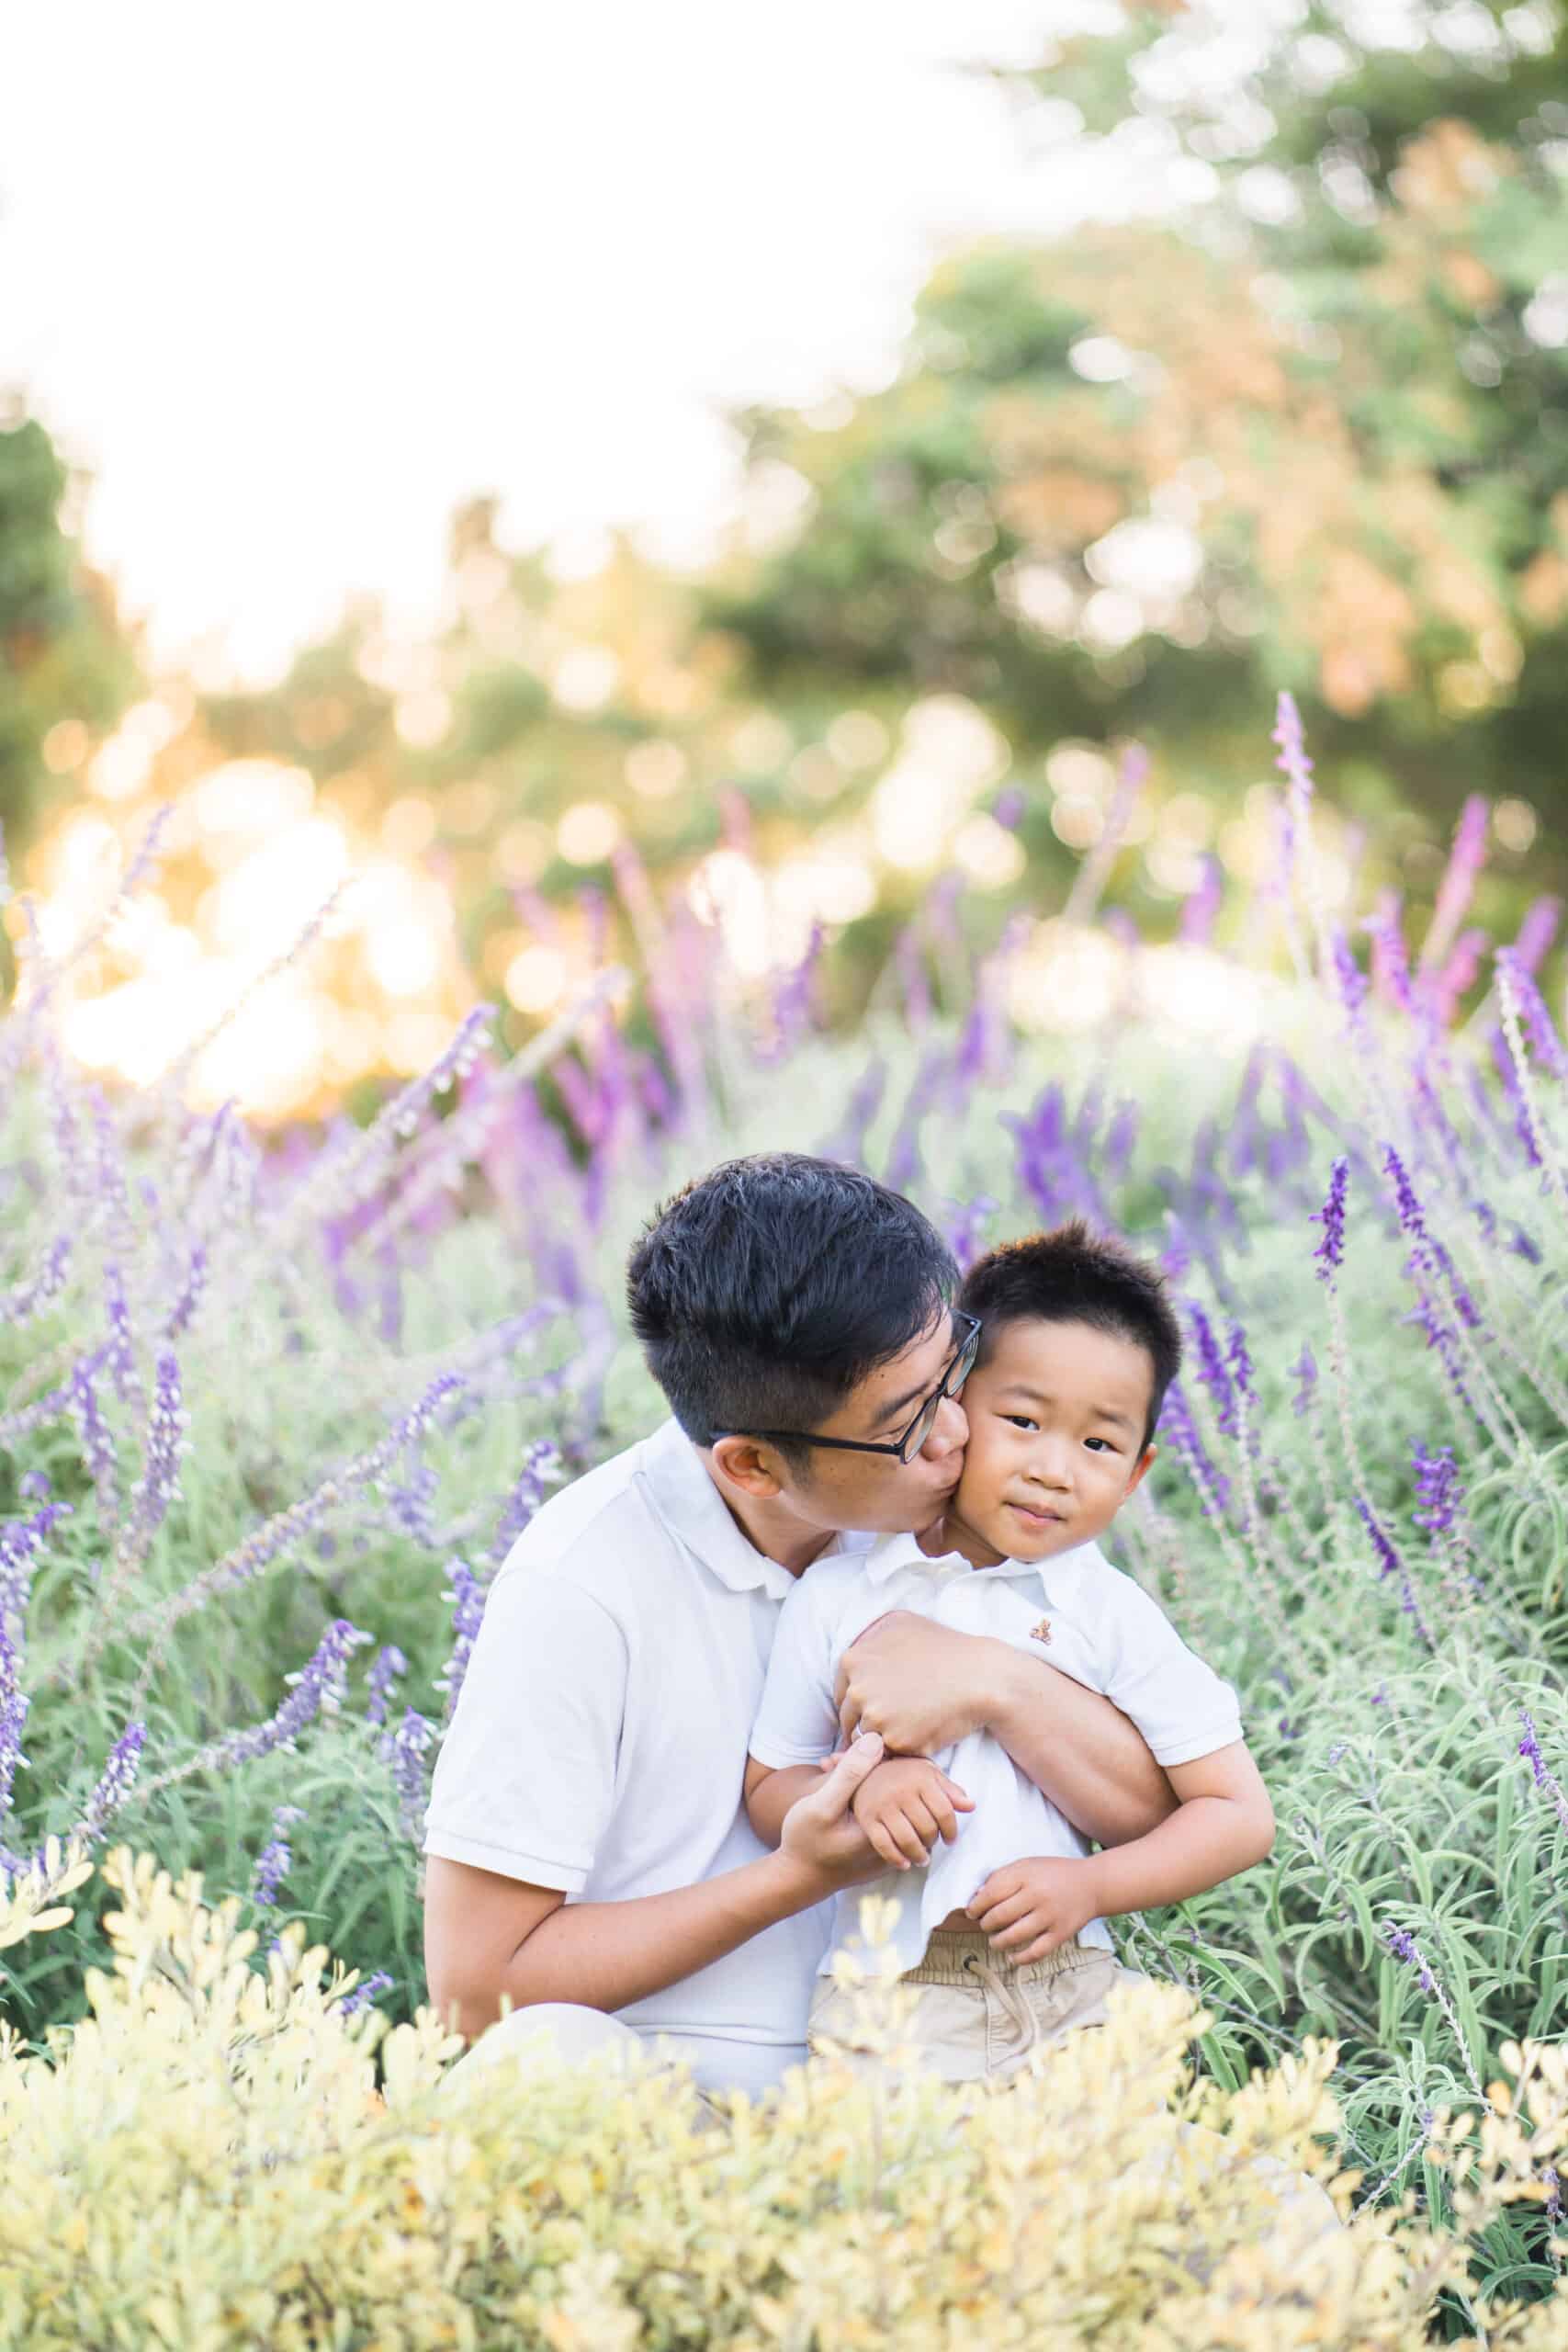 Dad with glasses kissing his son on the cheek in front of the lavender field. Blue Buoy Swim School